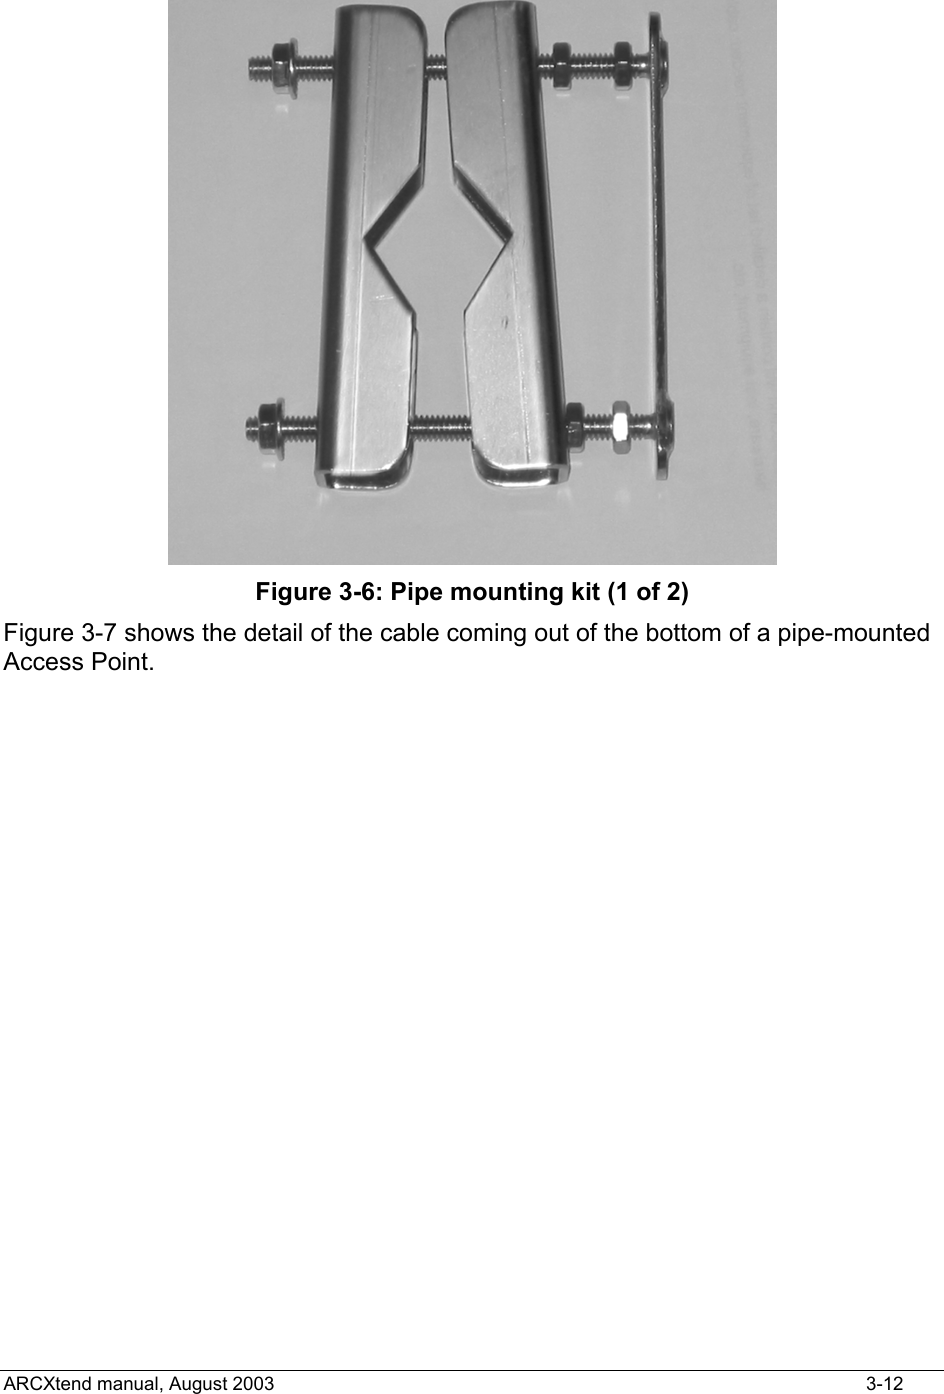   Figure 3-6: Pipe mounting kit (1 of 2) Figure 3-7 shows the detail of the cable coming out of the bottom of a pipe-mounted Access Point. ARCXtend manual, August 2003    3-12 